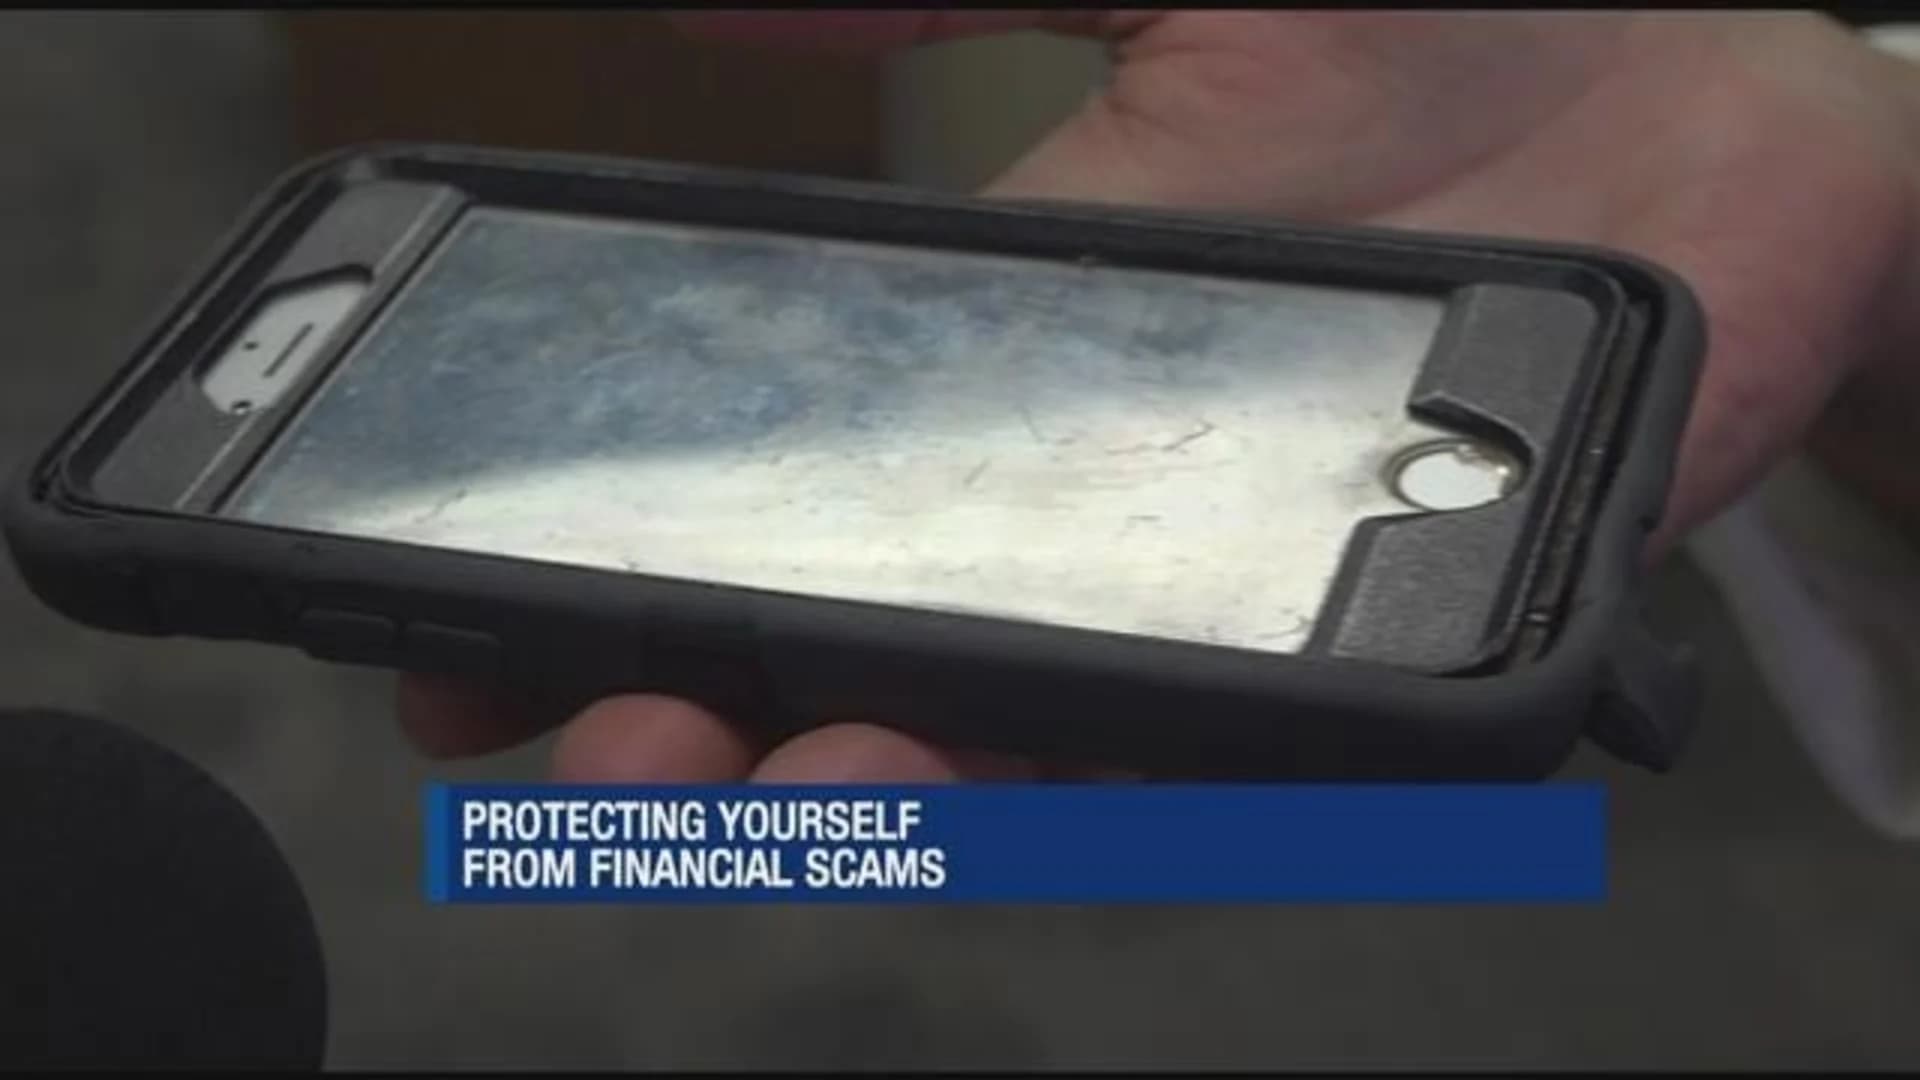 NYPD warns of financial scams through phone calls